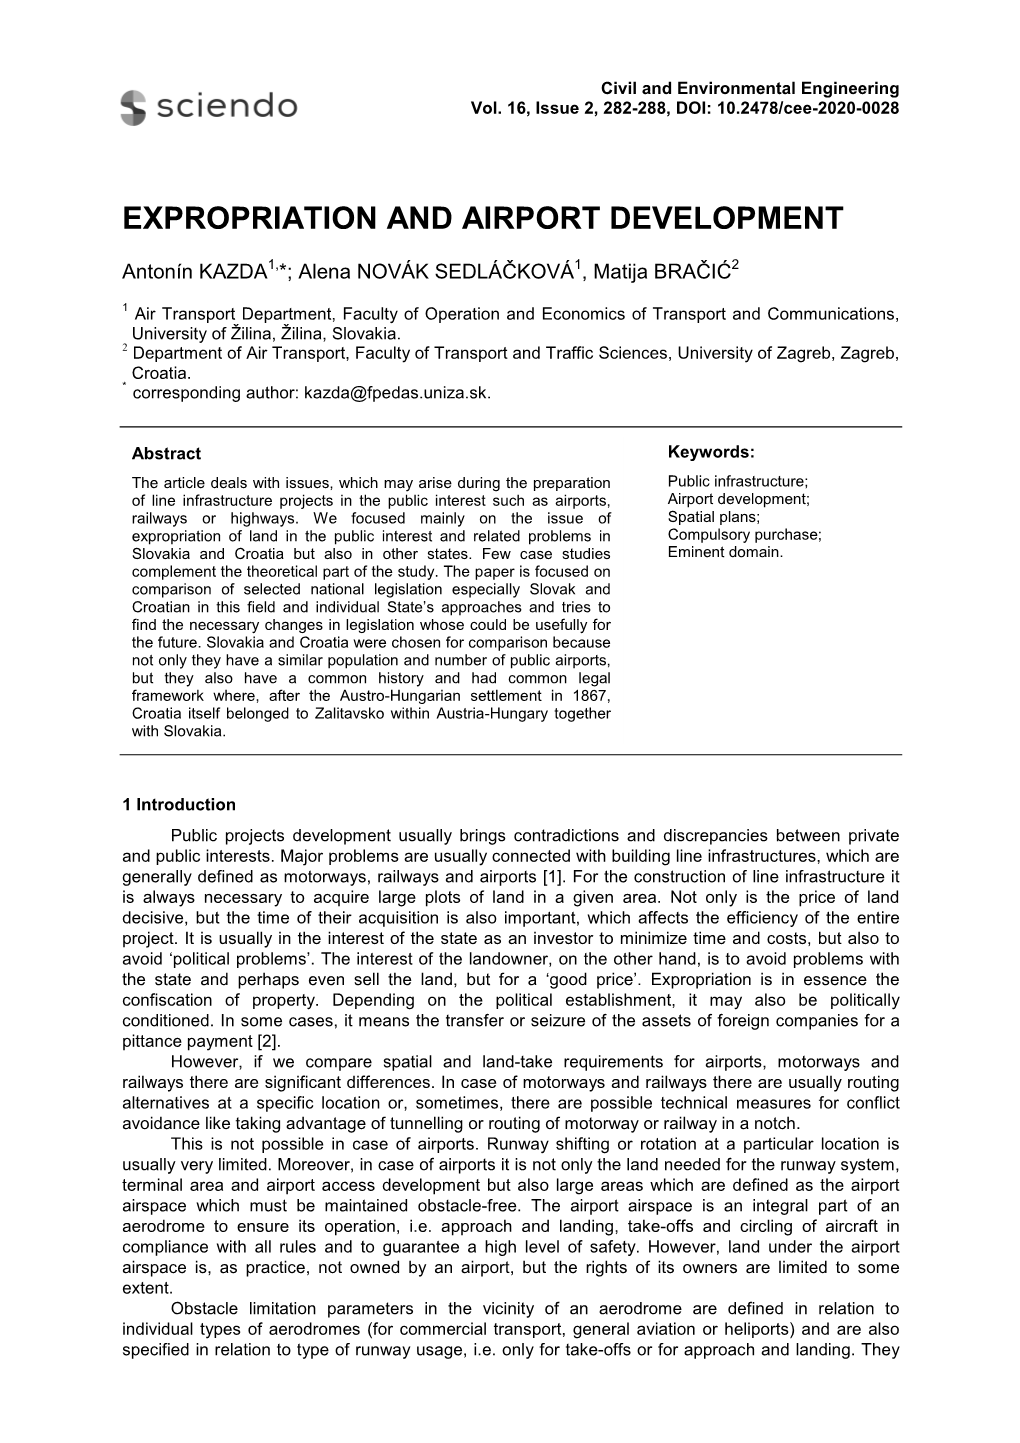 Expropriation and Airport Development